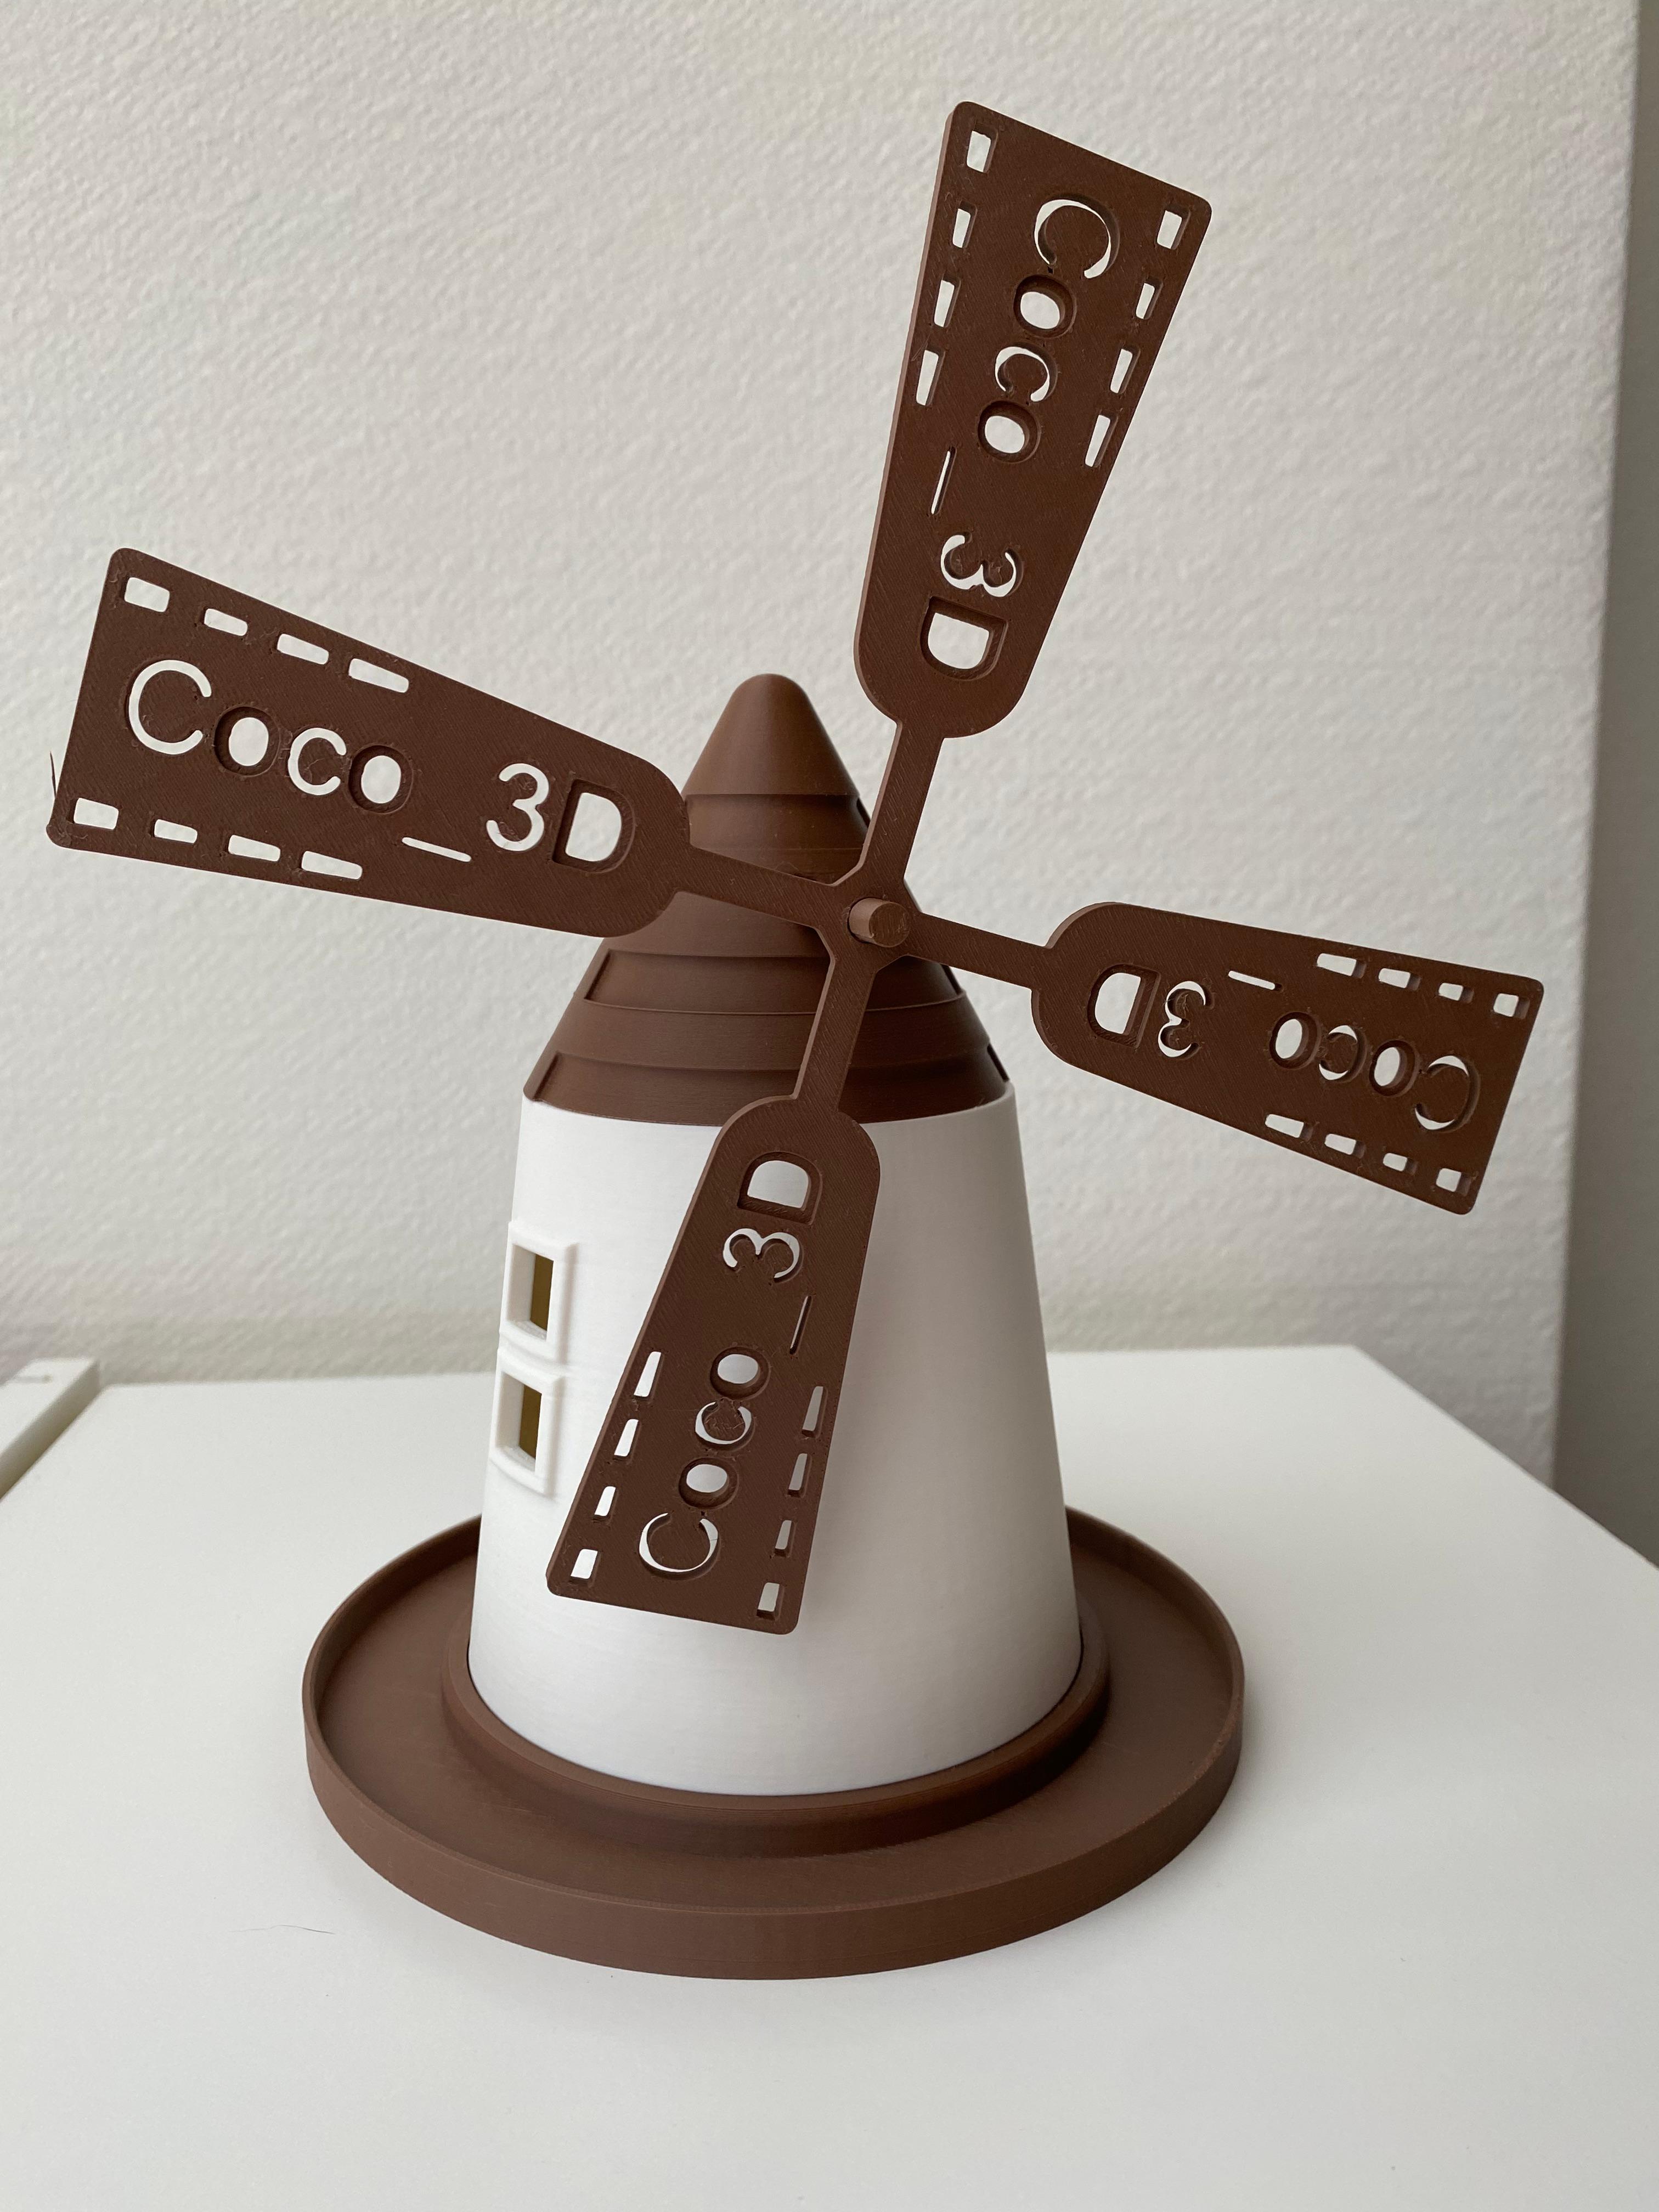 Windmill 7.4 - Thank you so much for this special design for me!!! I have my own windmill whoop whoop!
Printed with 0.20 mm on the bambulab.
Filament: 
Polymaker 'earth brown'
and 'cotton white'
 - 3d model